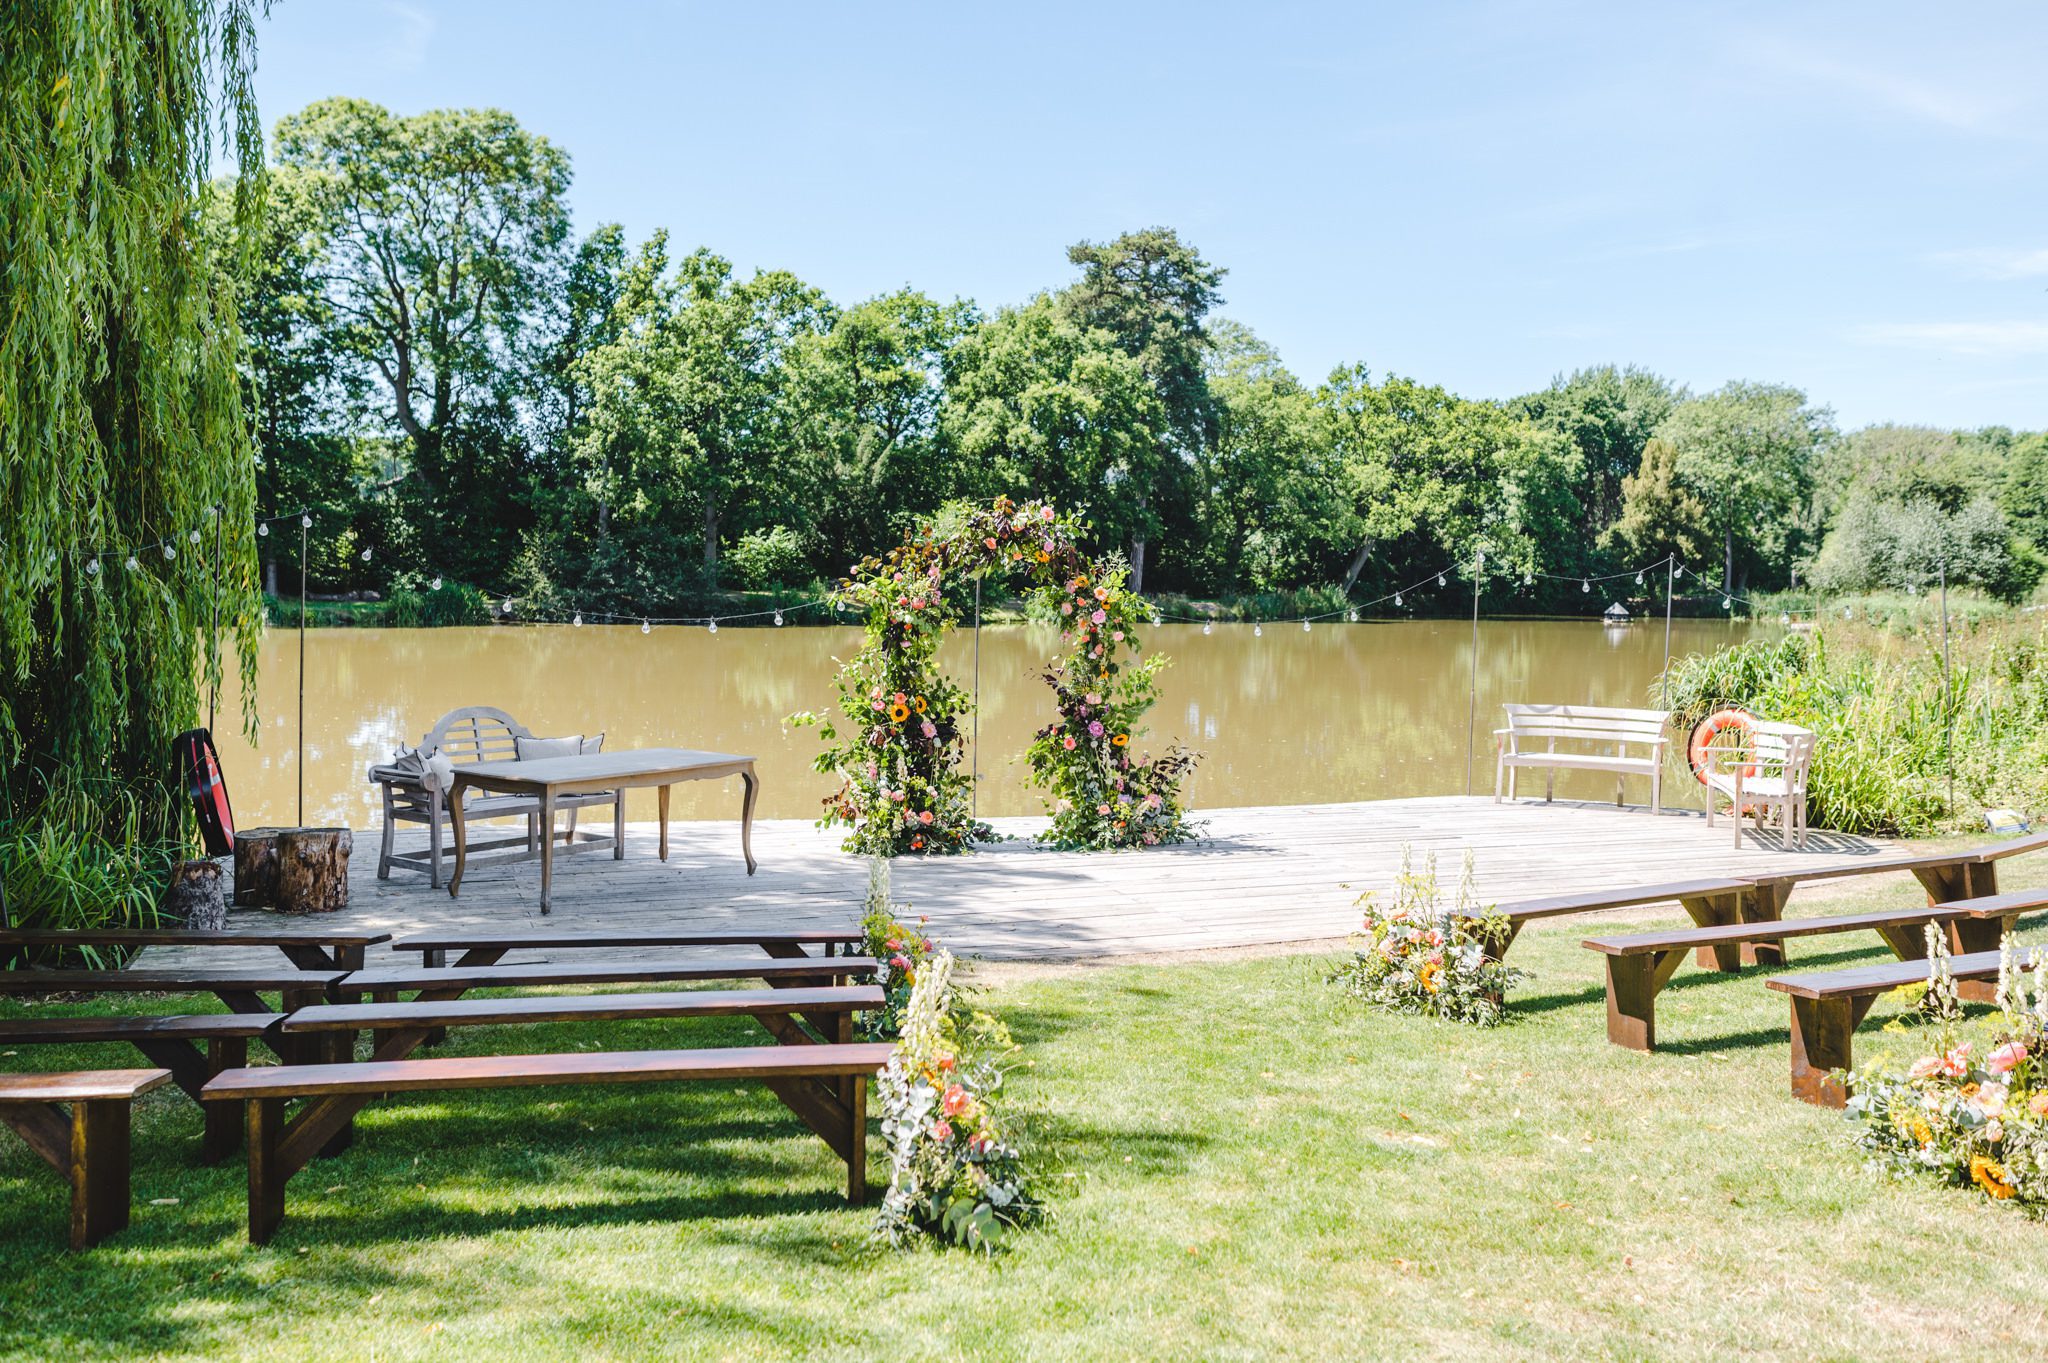 The ceremony location at Barns and Yard by the lake